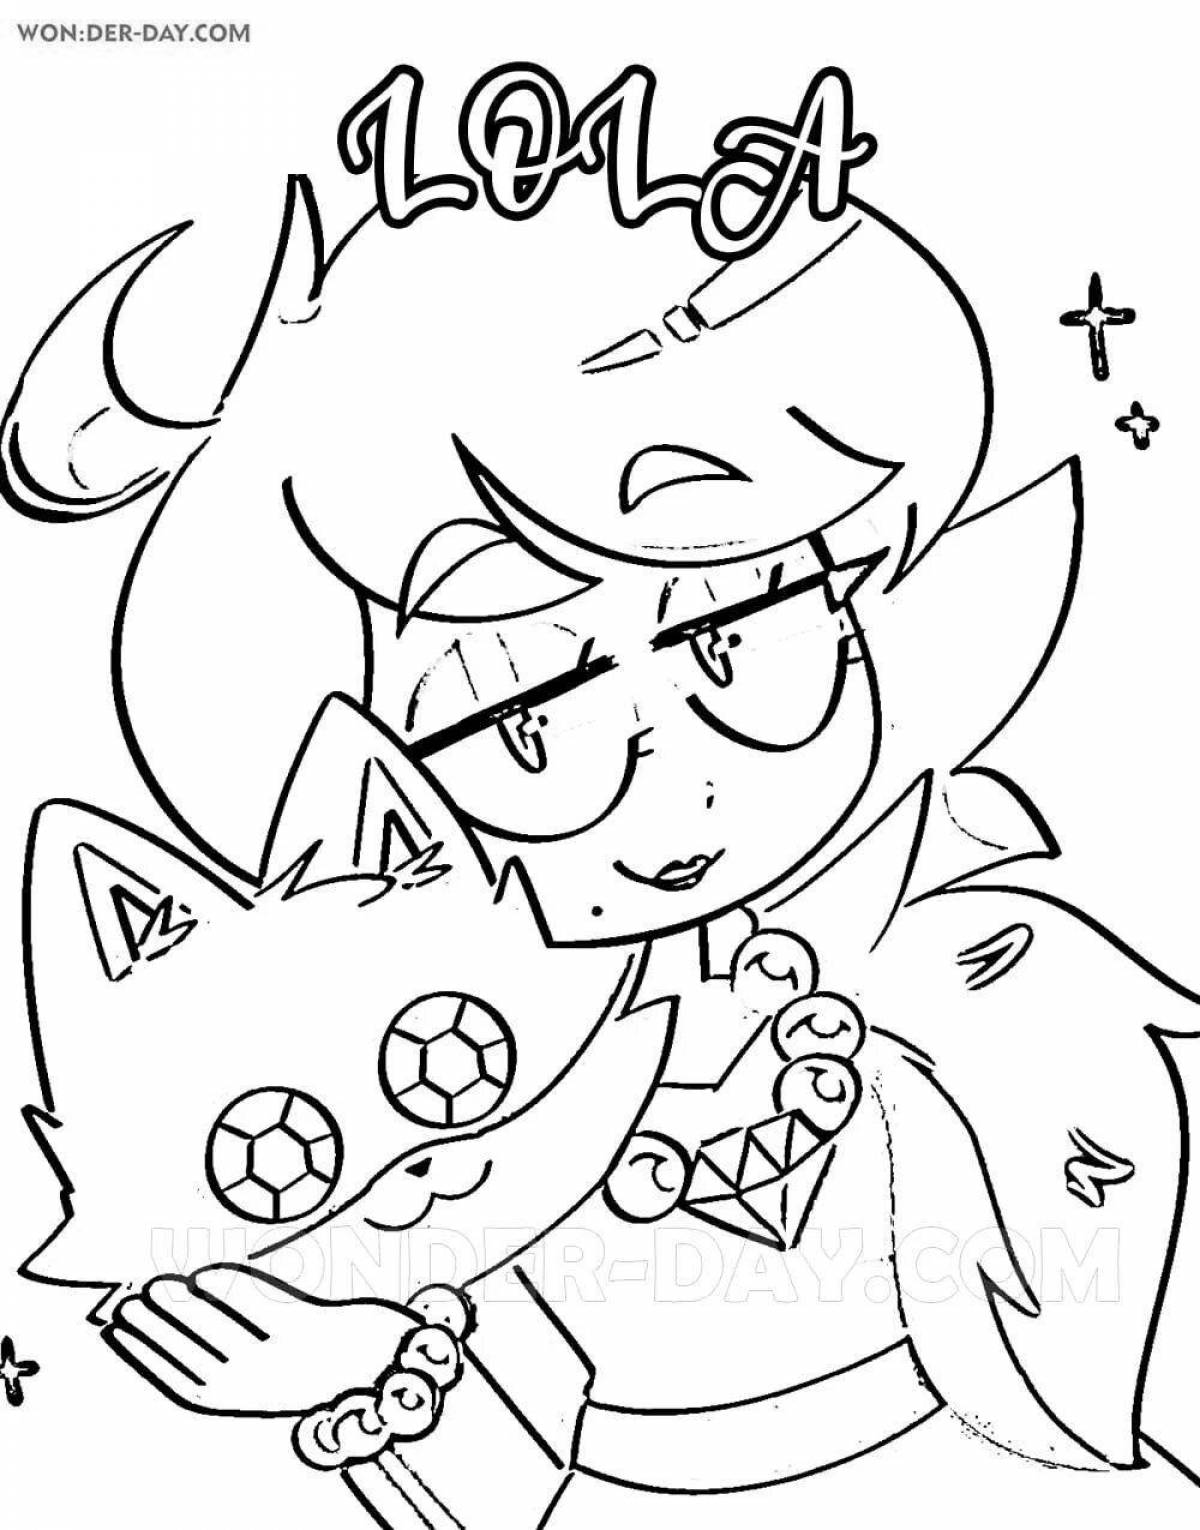 Outstanding lola brawl stars coloring page